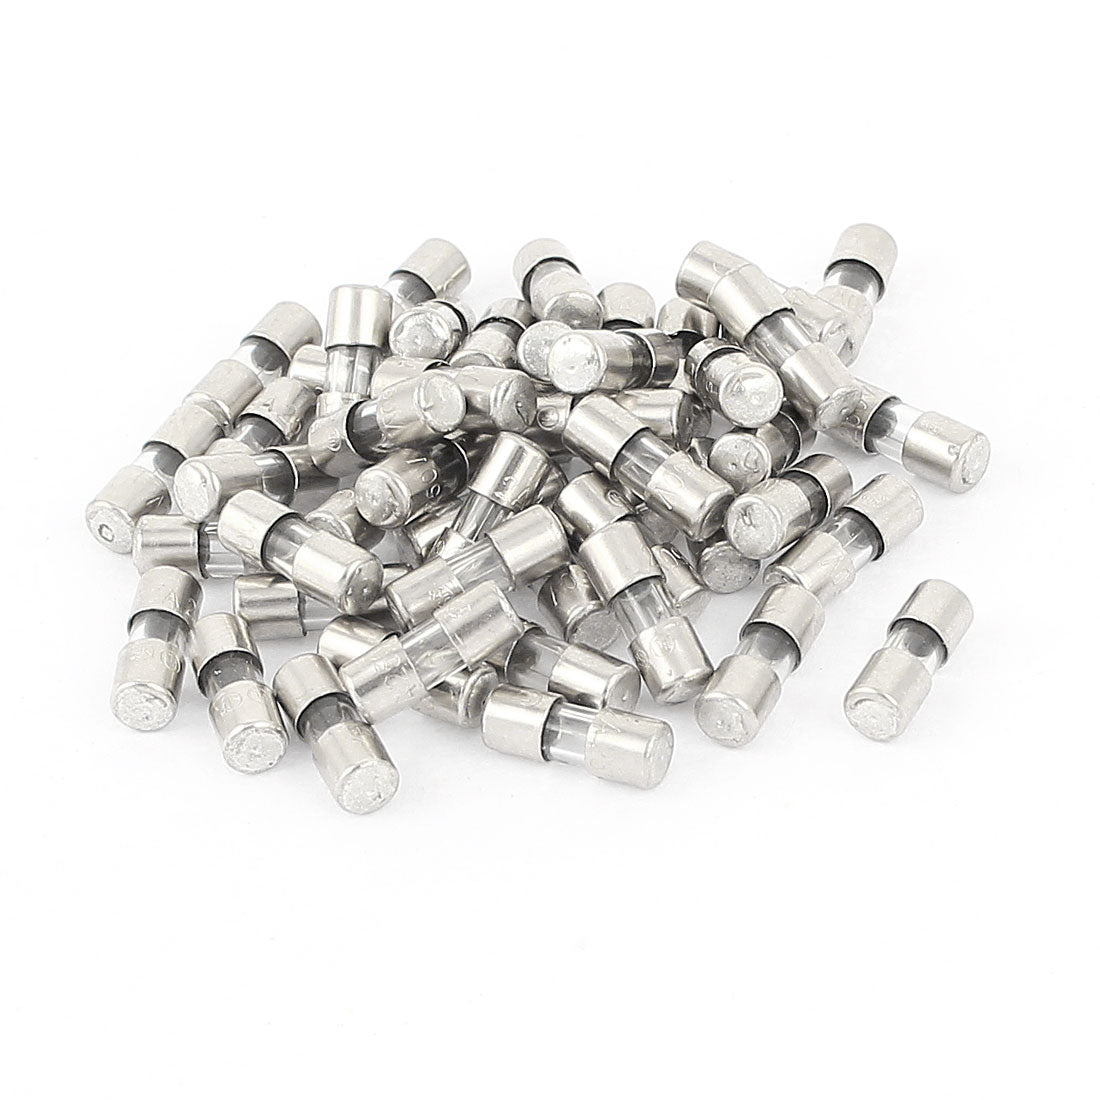 uxcell Uxcell 50pcs 10x4mm AC 250V 2A Slow Blow Acting Mini Miniature Glass Fuse Tube